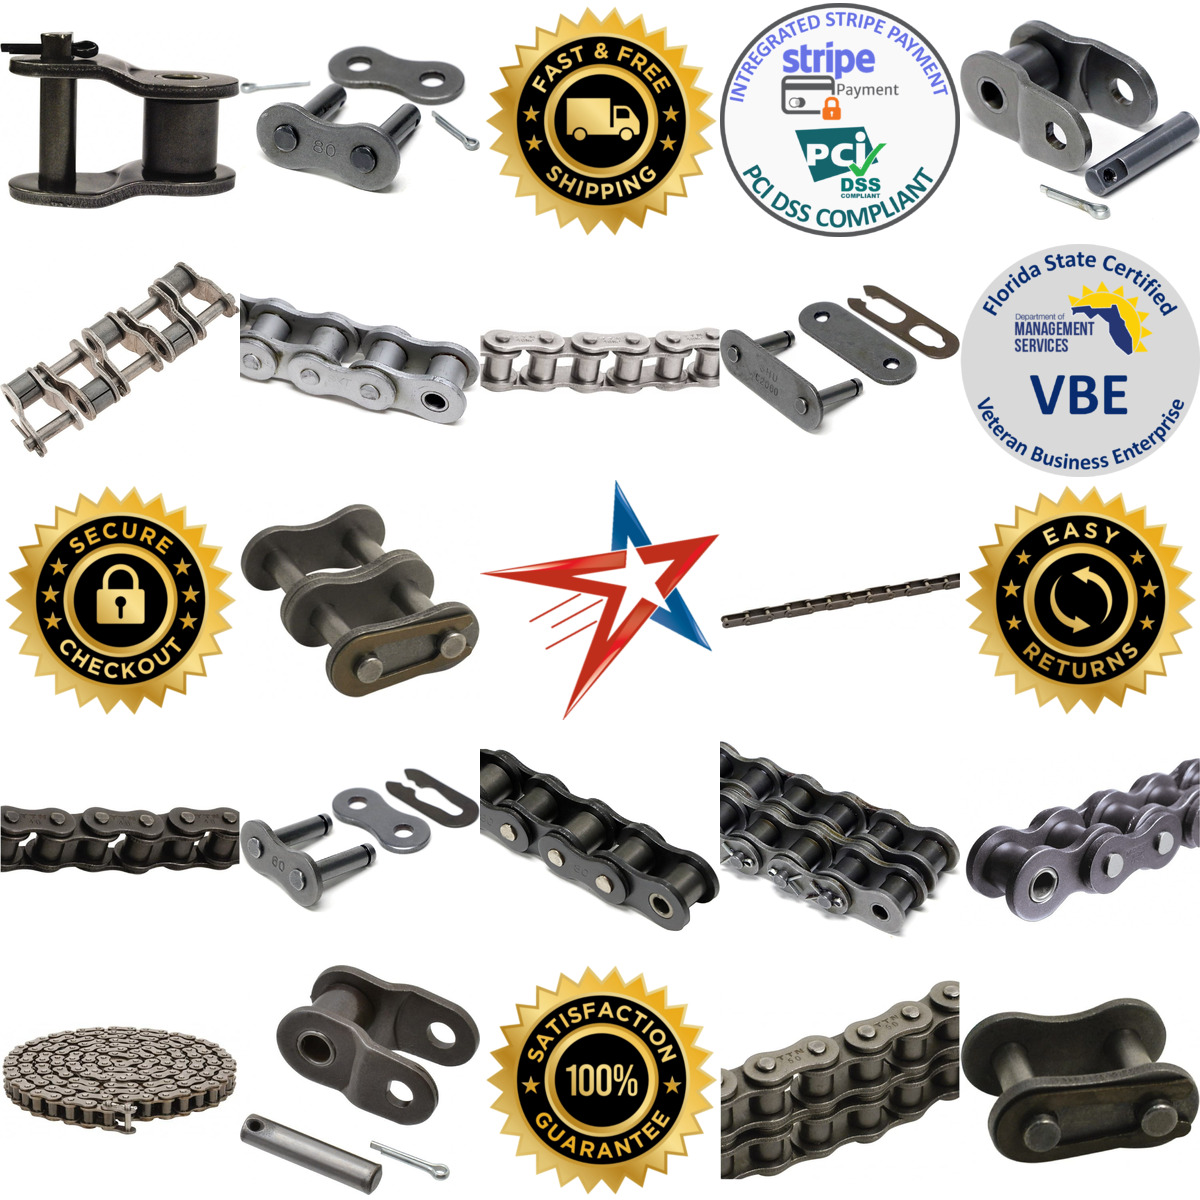 A selection of Chain and Accessories products on GoVets